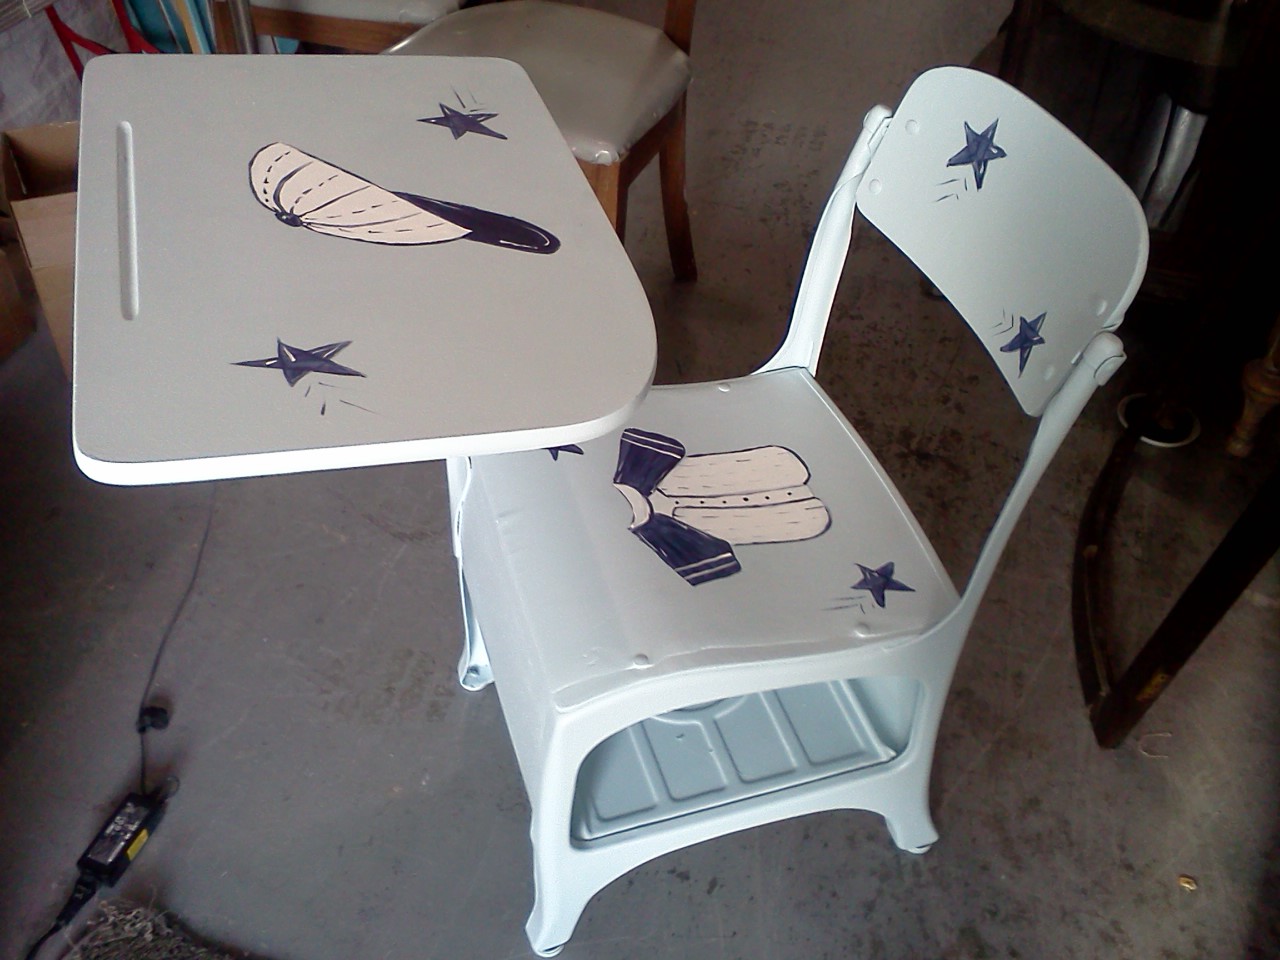 Handpainted Furniture Blog Shabby Chic Vintage Painted Furniture